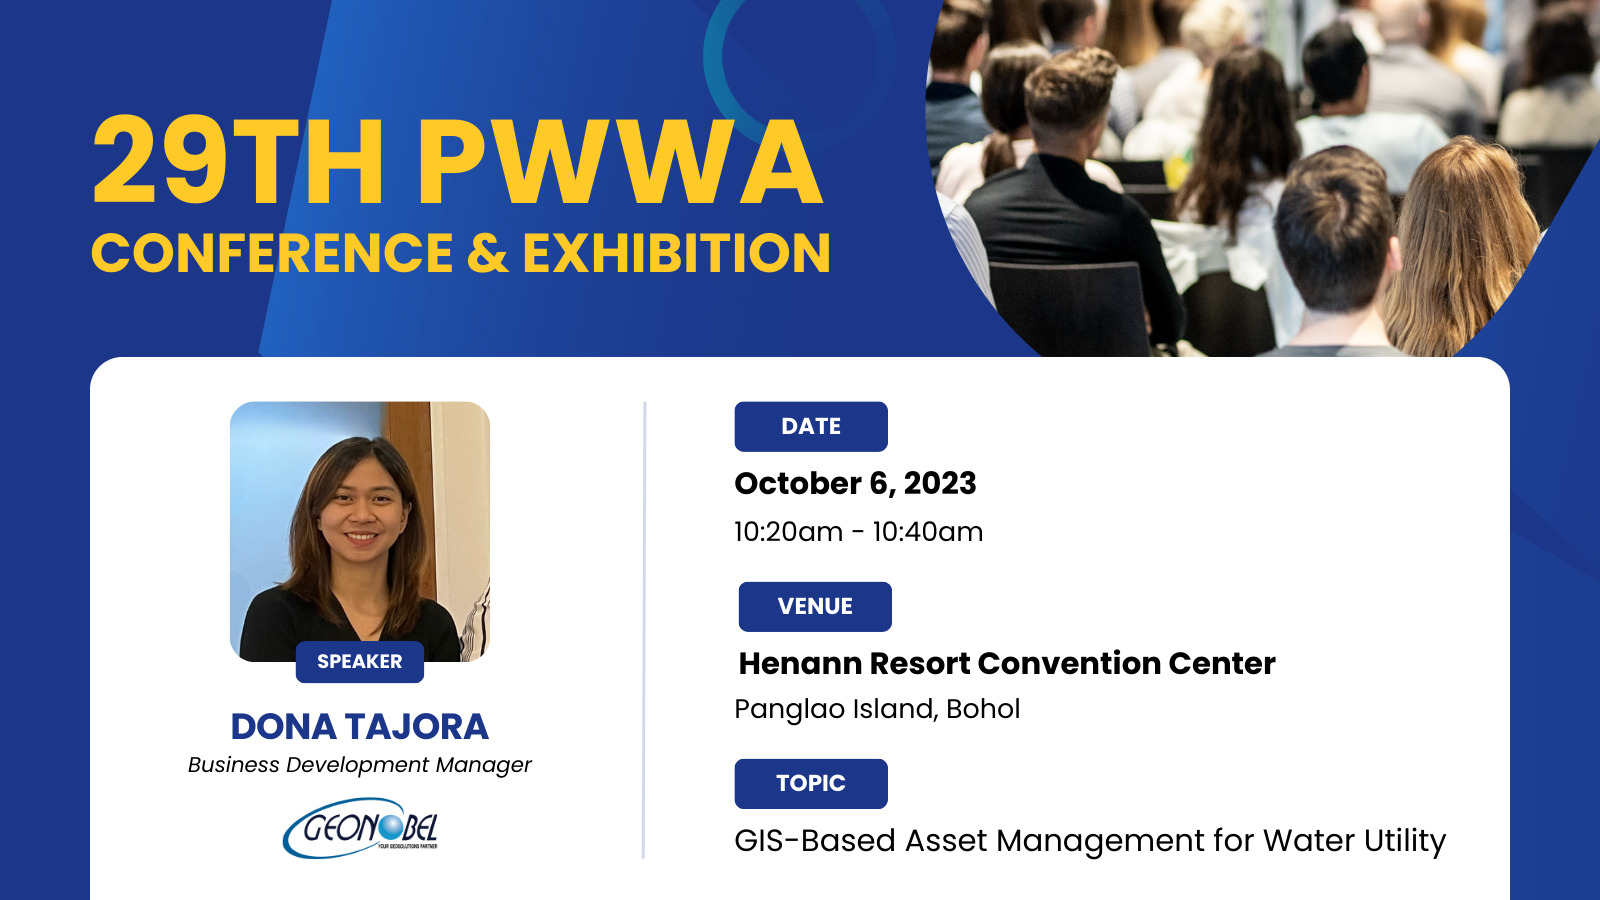 GeoNobel, a subsidiary of Nobel Systems, is proud to announce its participation in the 29th Philippine Water Works Association (PWWA) Conference & Exhibition on October 4 to 6, 2023 at Henann Resort and Convention Center in Bohol.